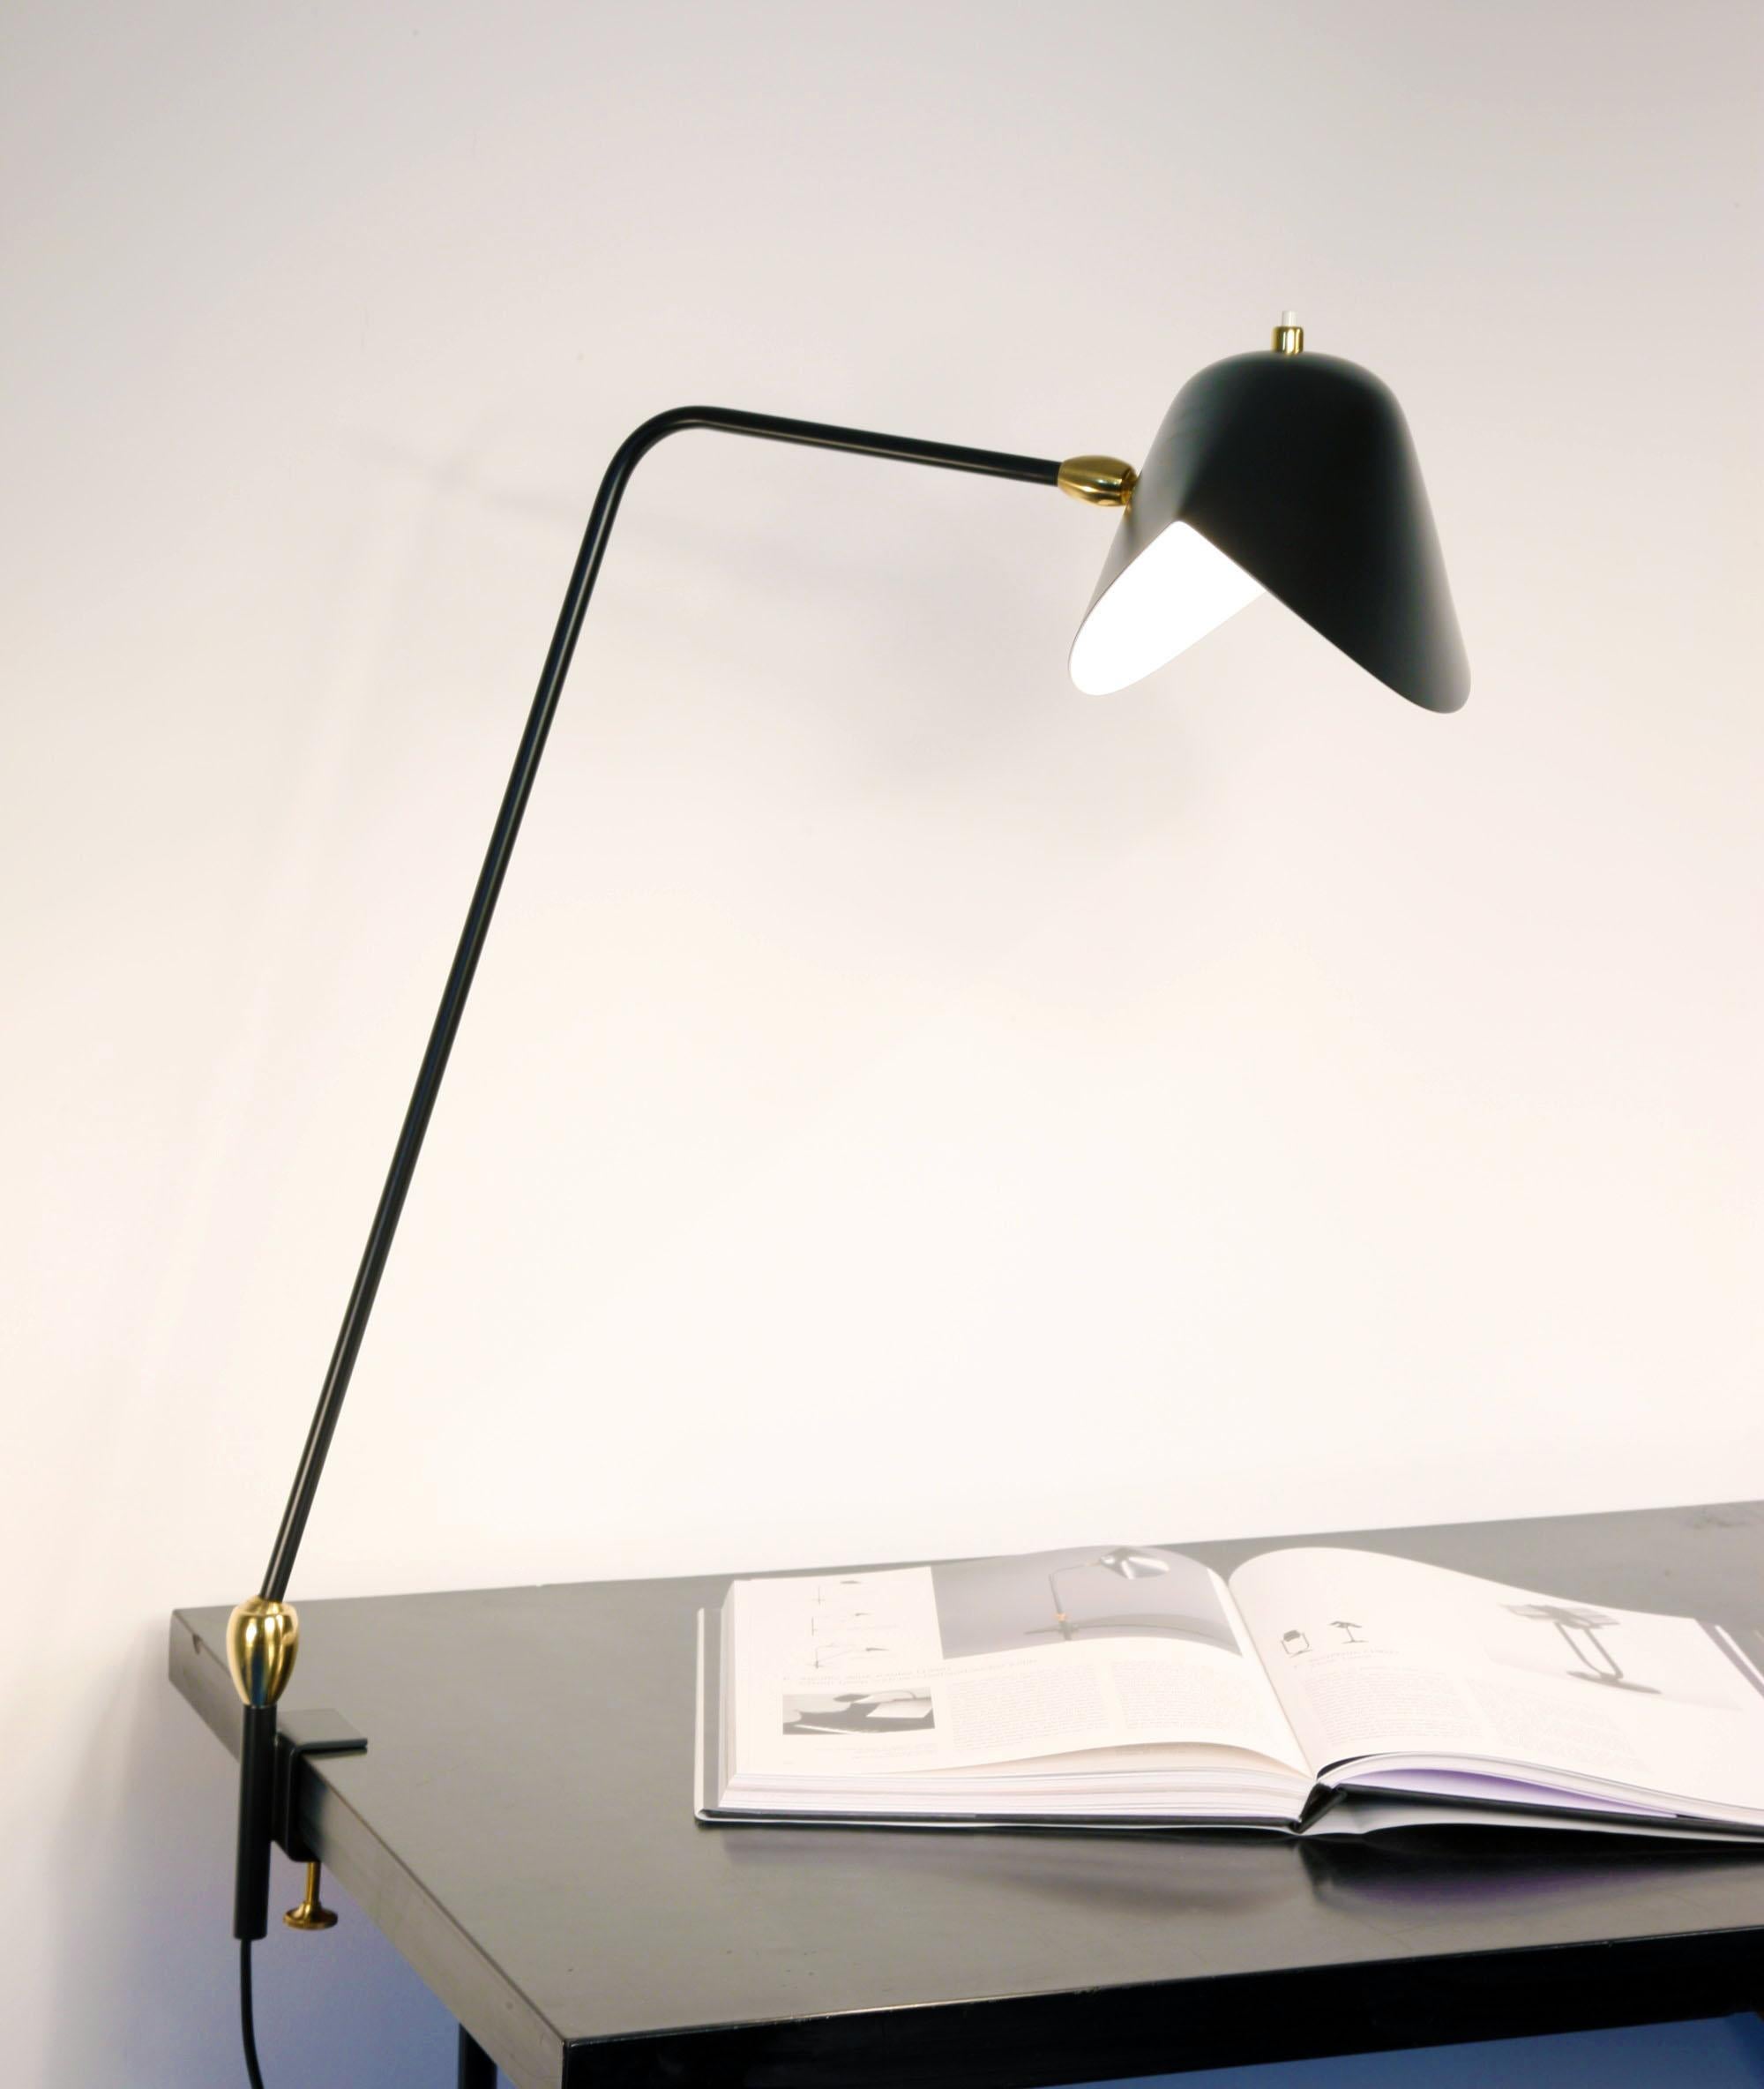 36 inches at its highest, this adjustable lamp may affix to many surfaces providing direct lighting where it is needed.

Available in white or black. Brass swivels connect the shades.

Color option
Available in black or